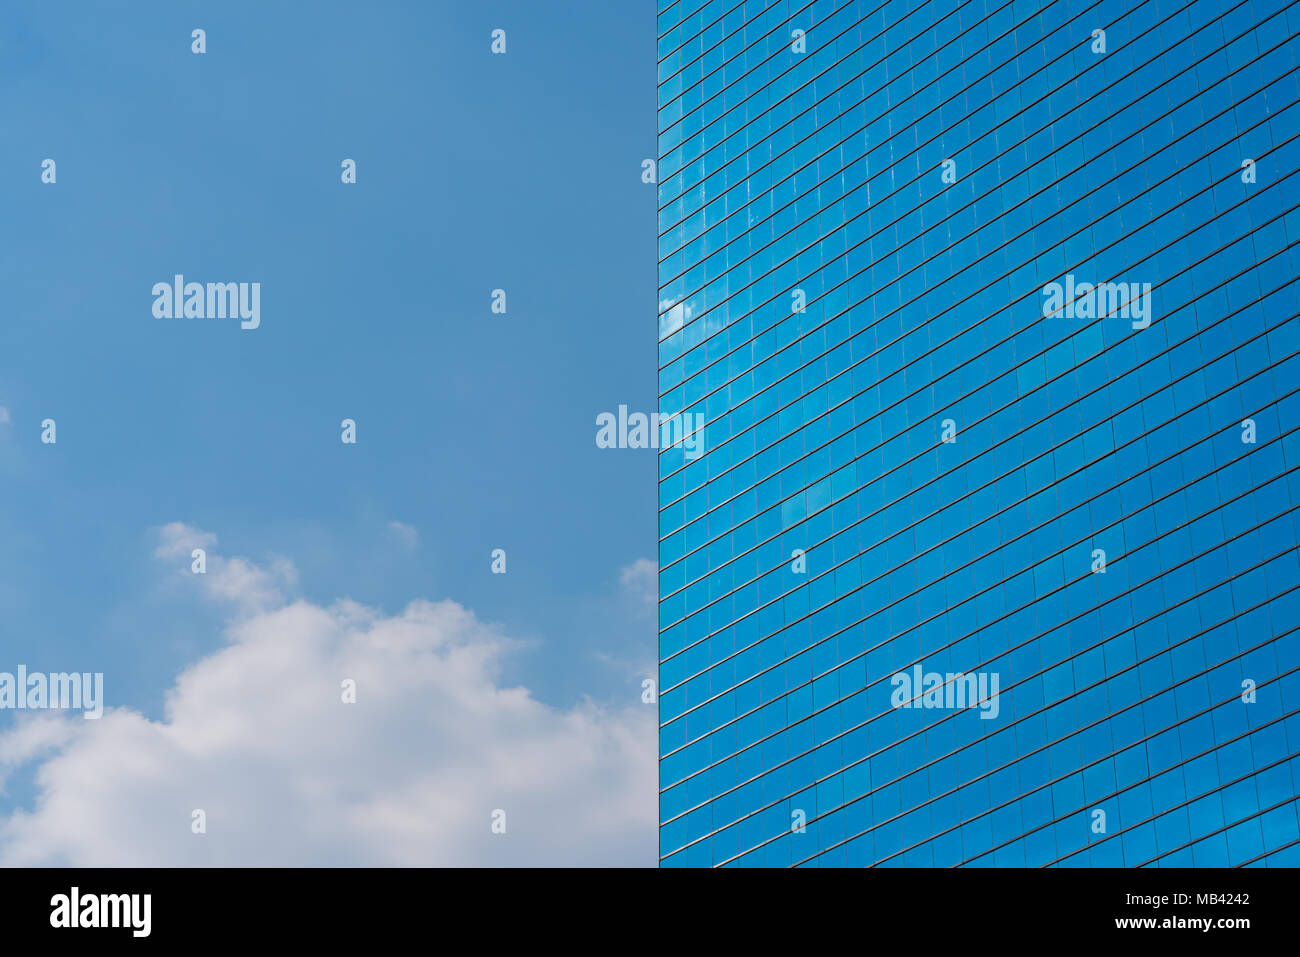 Blue office glass building and blue sky with a cloud - horizontal photo. Skyscraper and the sky divide the frame into two symmetrical halves Stock Photo